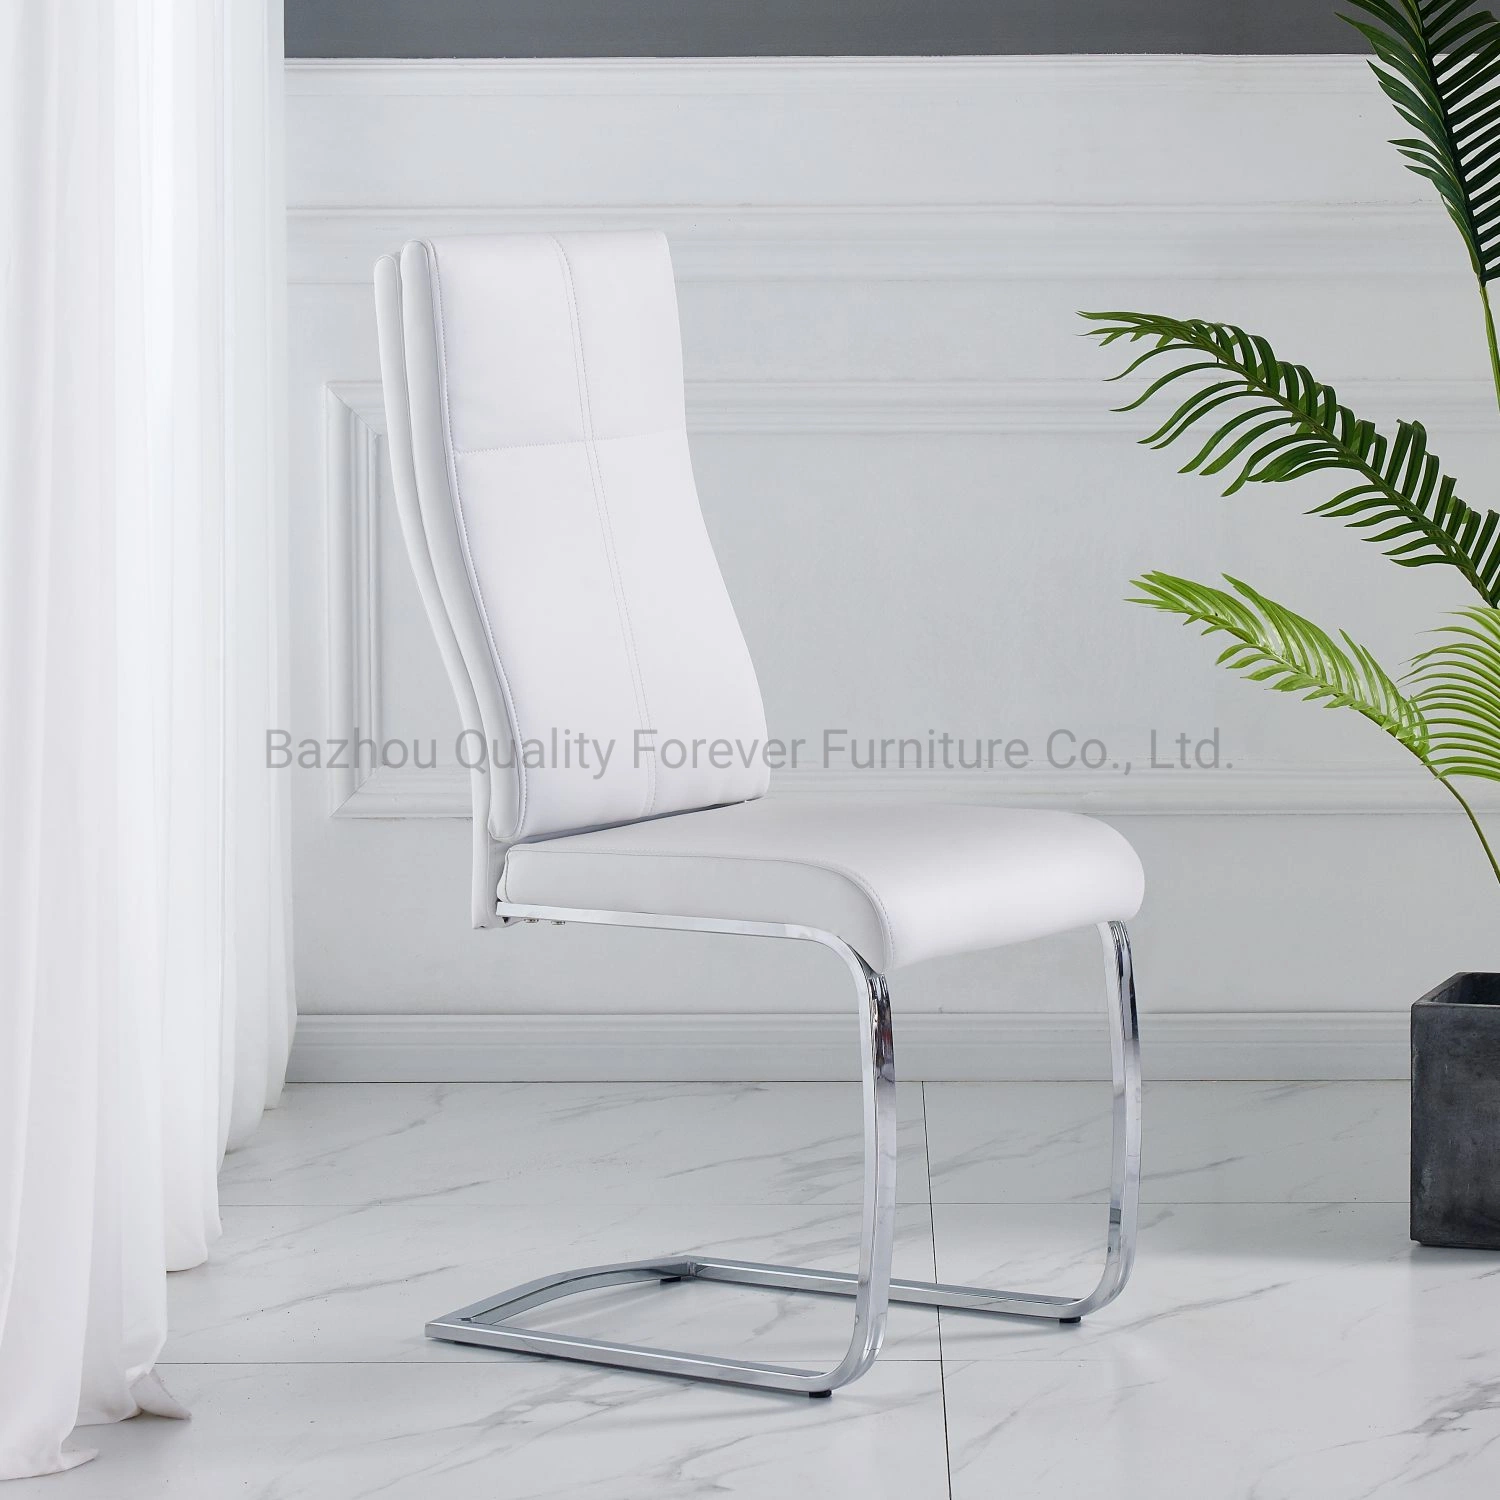 Modern Home Outdoor Restaurant Banquet Furniture Metal White PU Leather Steel Hotel Restaurant Dining Chair for Dining Room Furniture